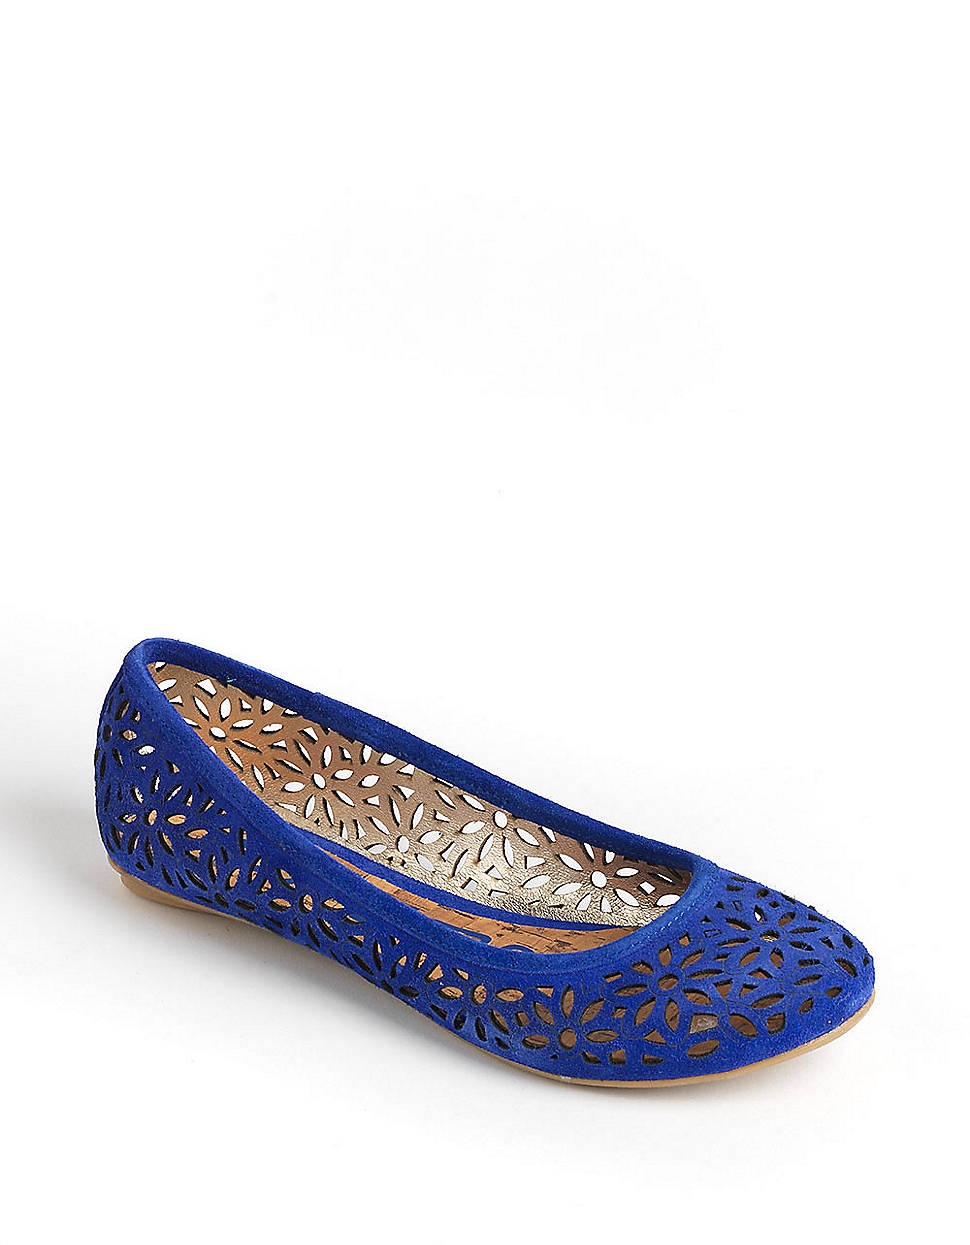 Lyst - Kenneth Cole Reaction Slipster Suede Ballet Flats in Blue